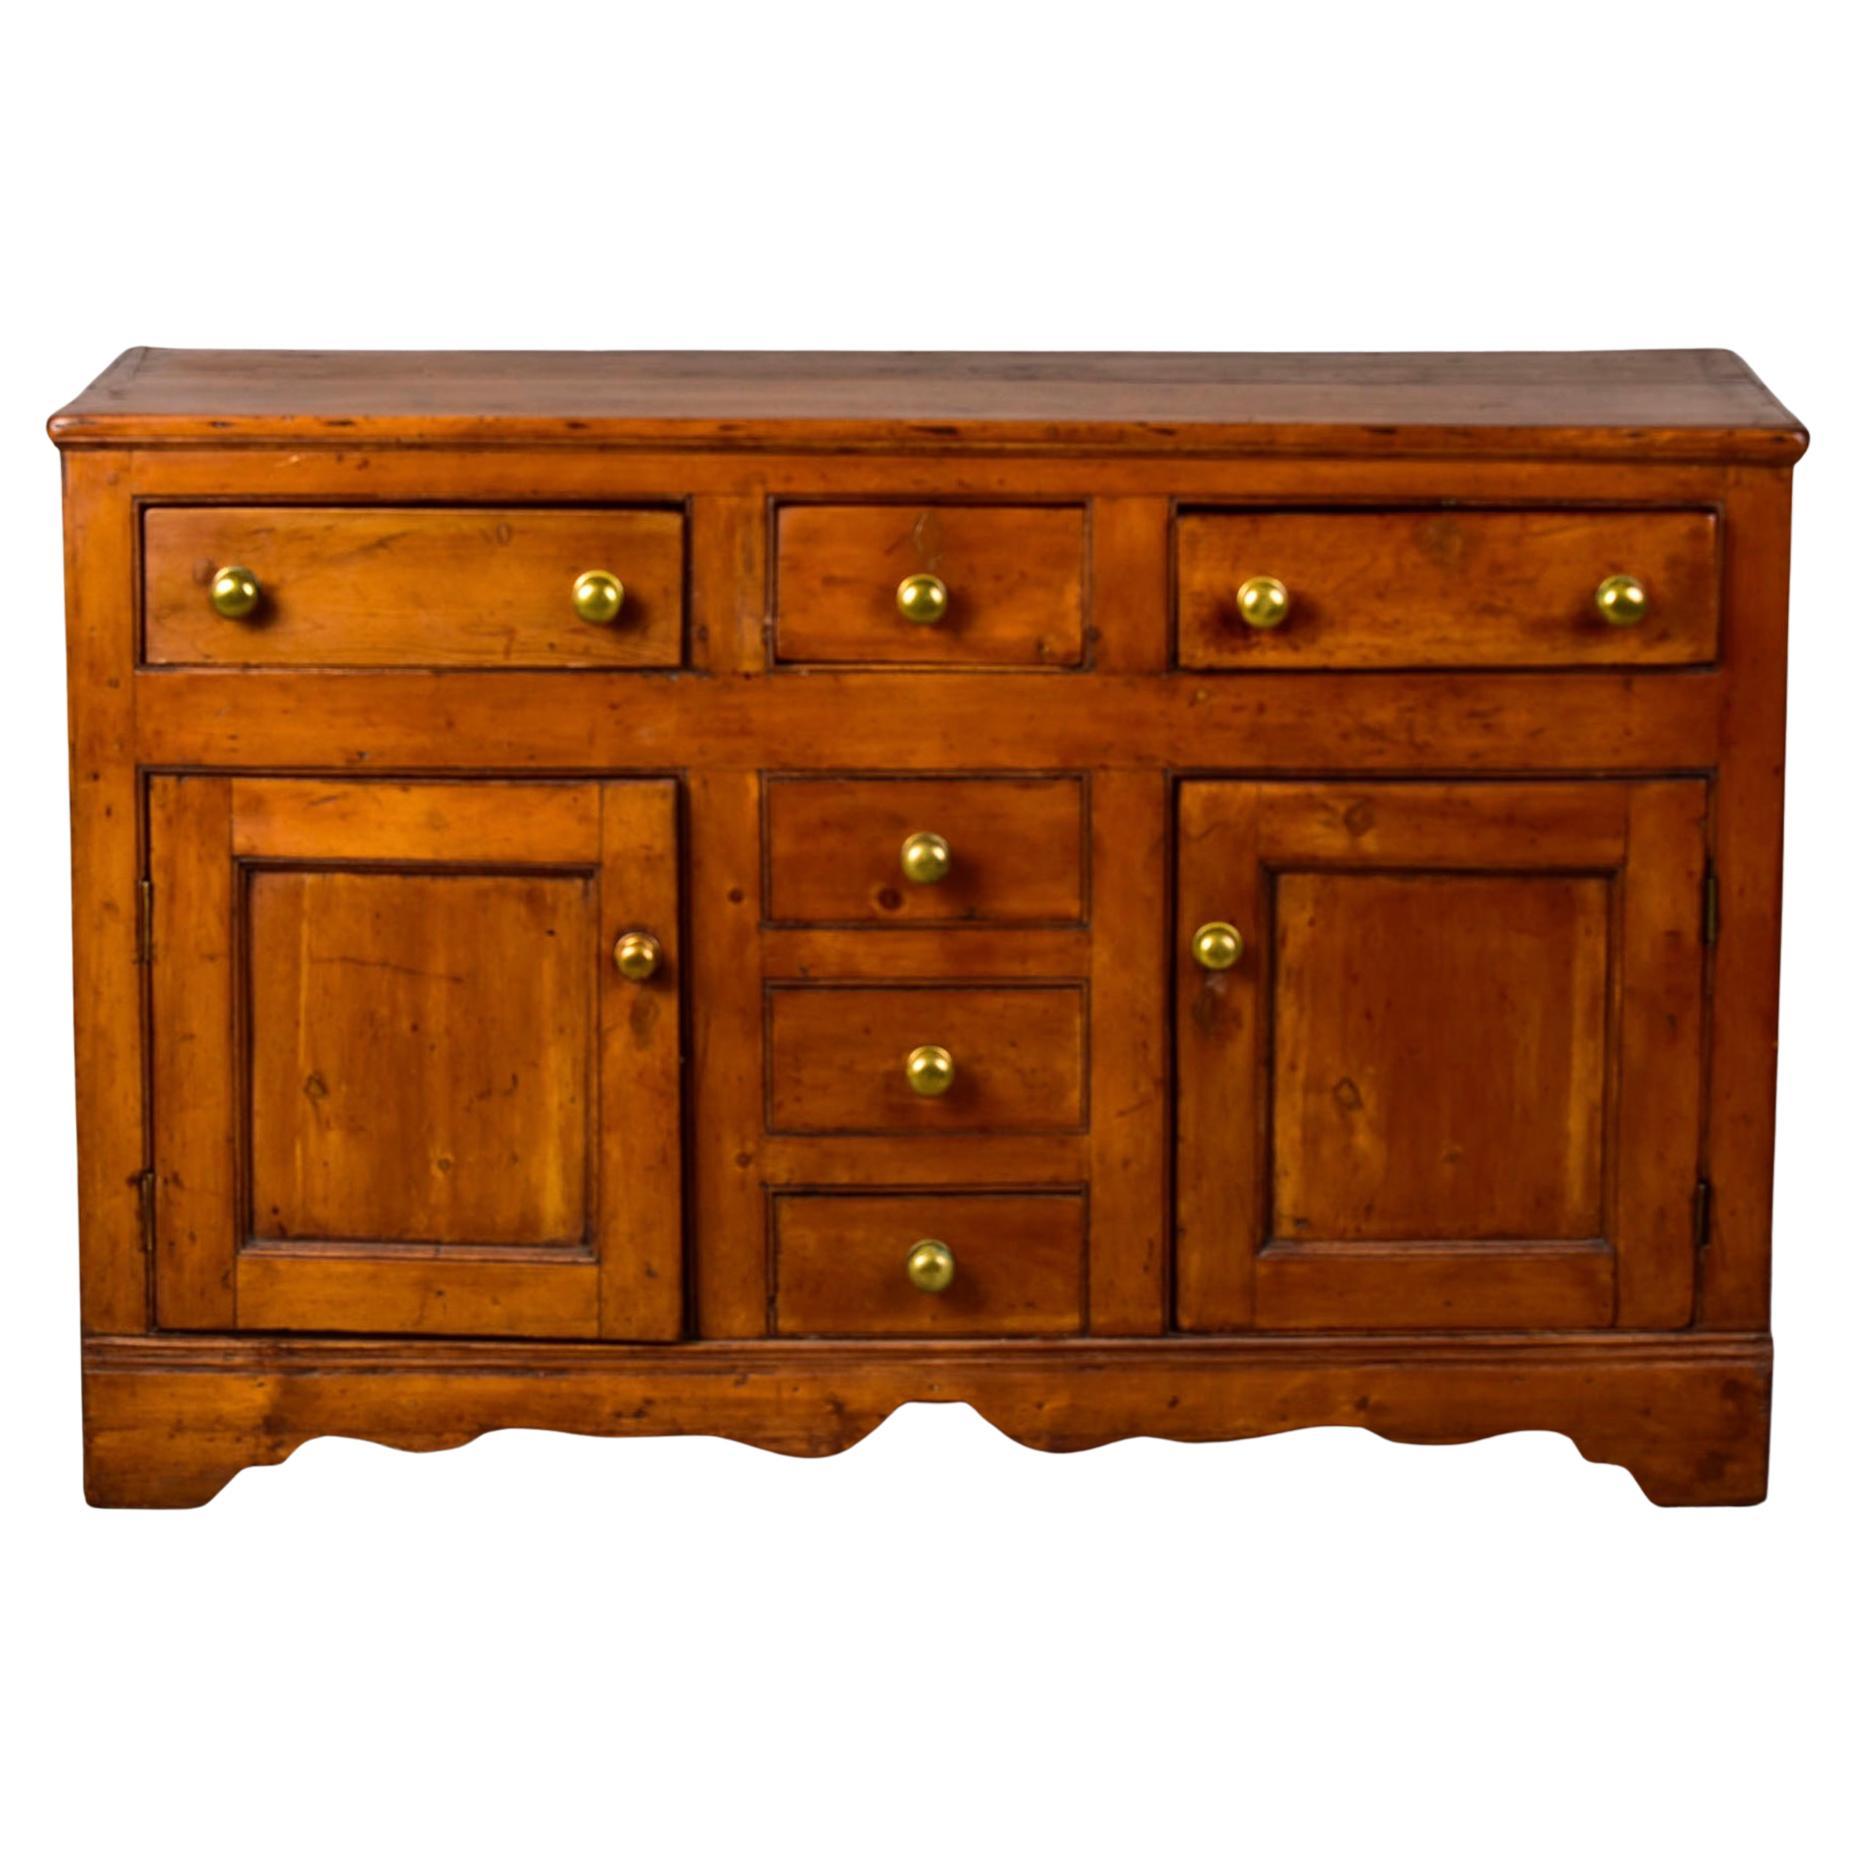 19th C English Country Pine Buffet with Original Brass Knobs